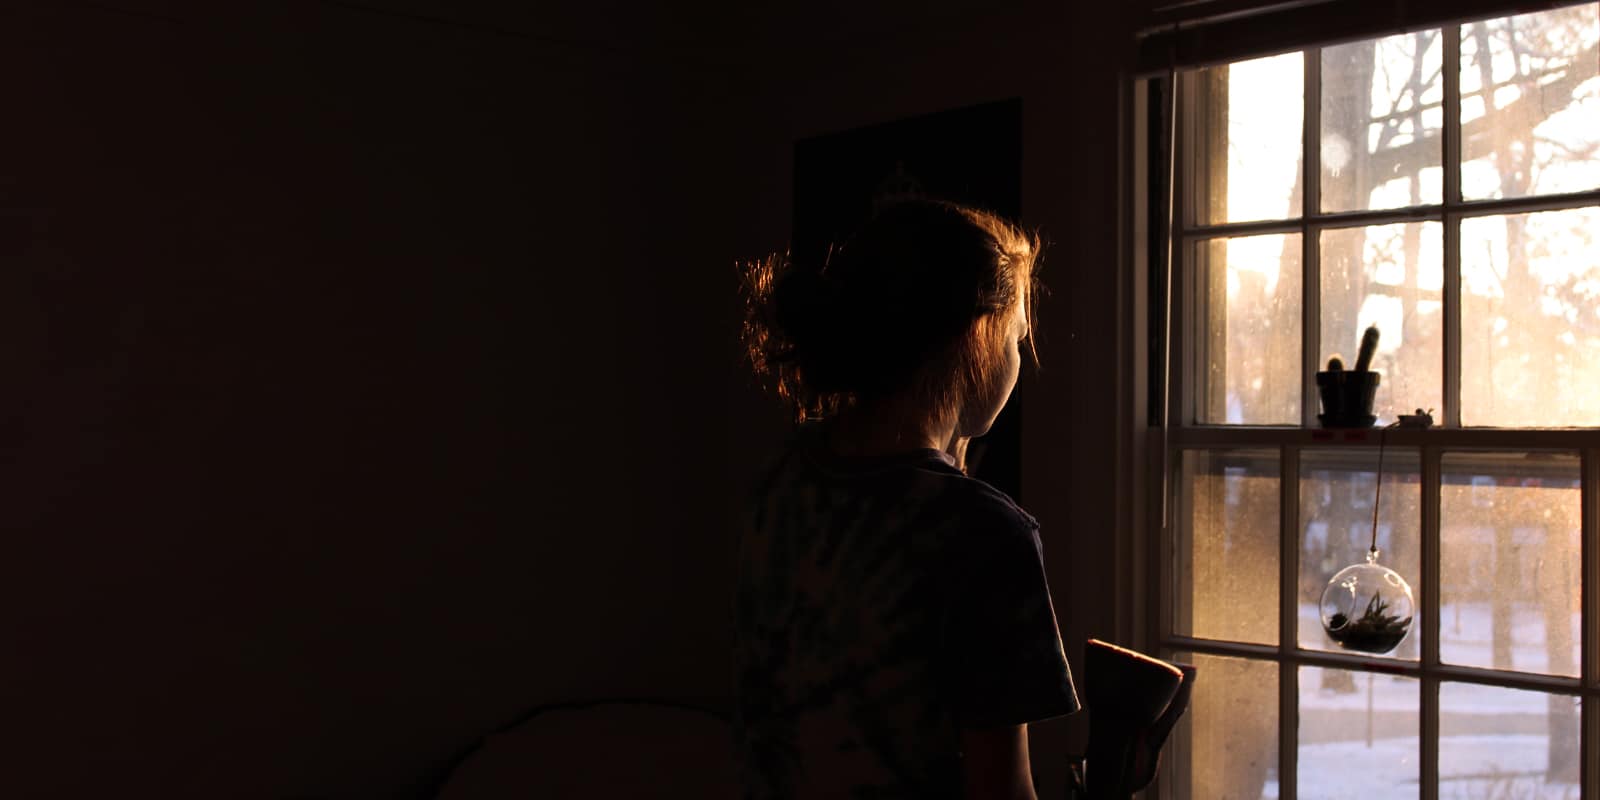 An image of a woman looking out the window in a darkly lit room